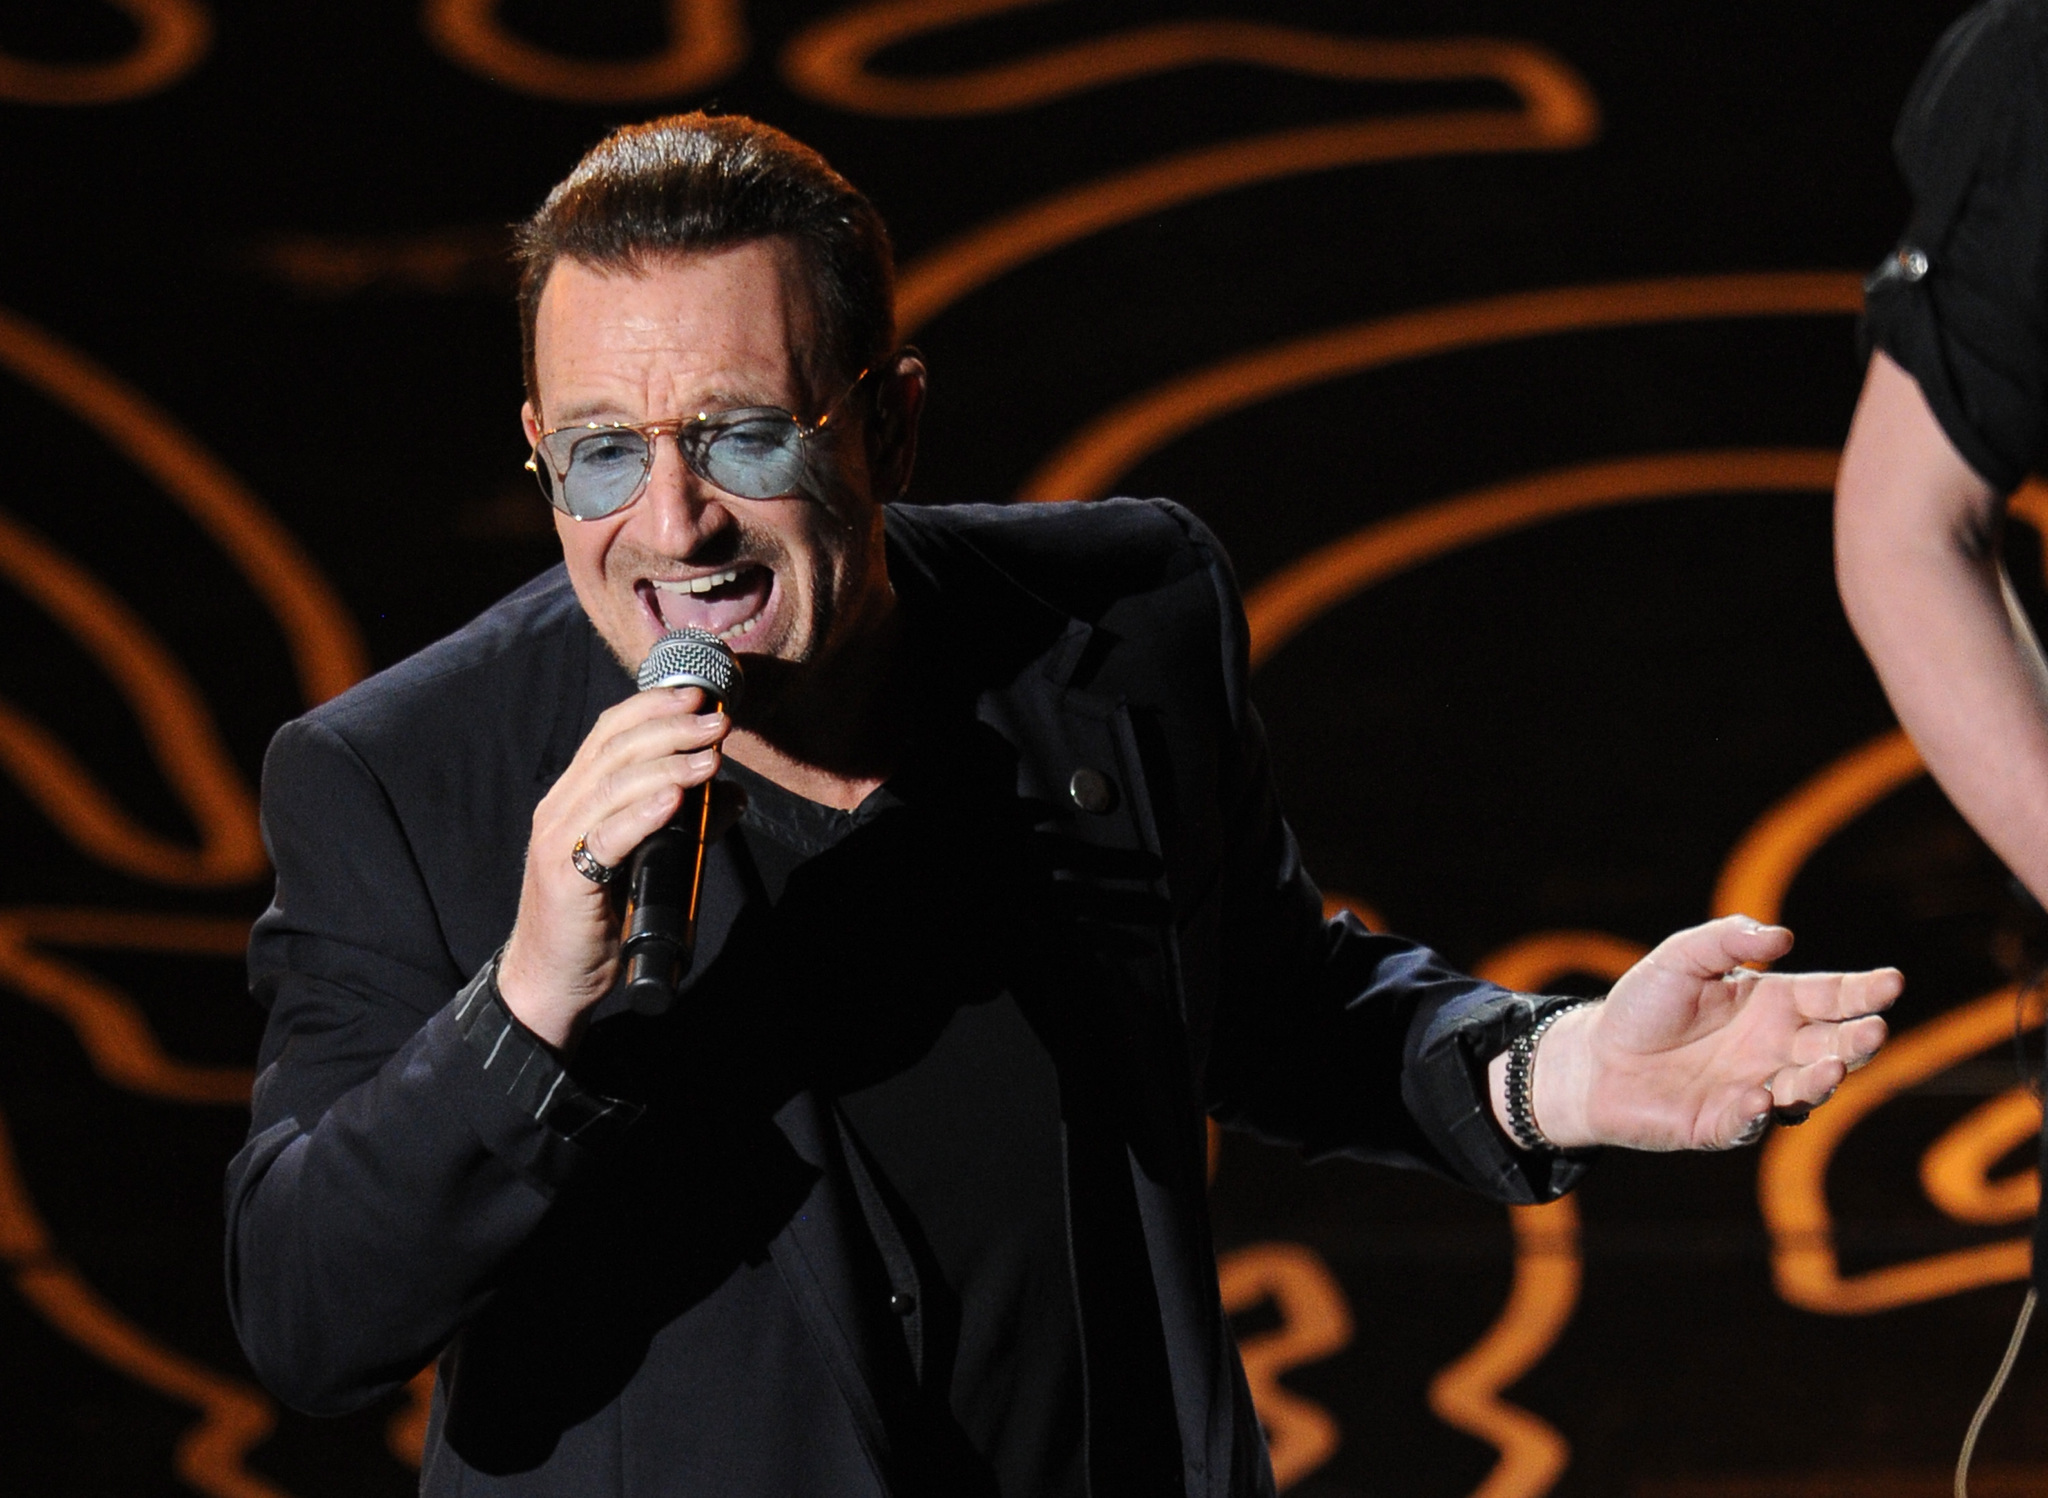 Bono at event of The Oscars (2014)